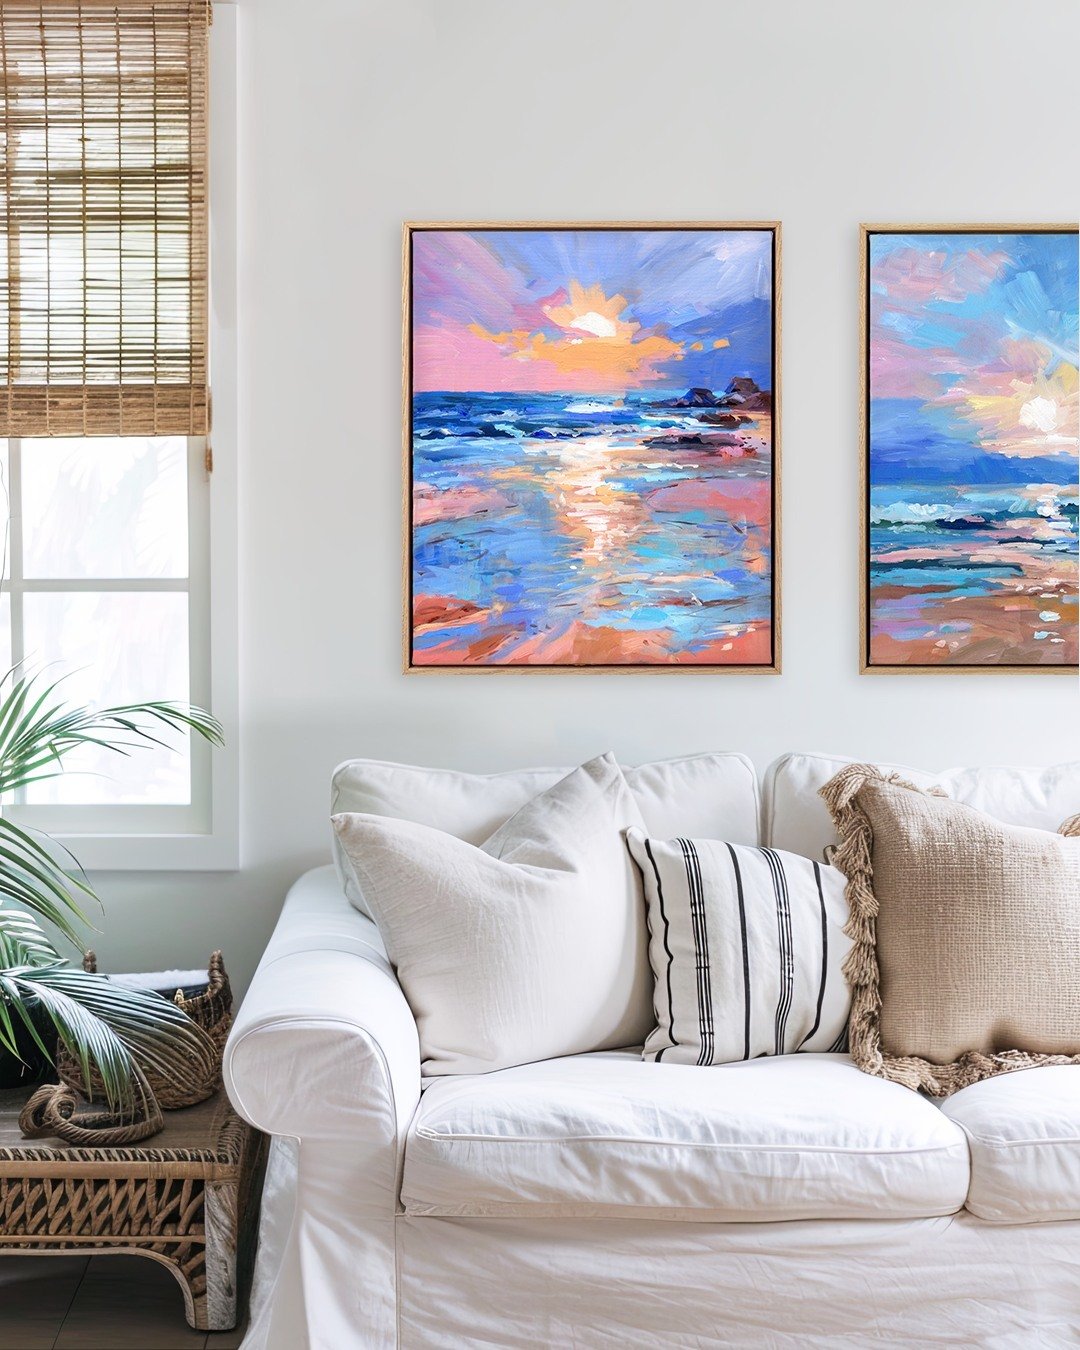 Orange Sky Don't Go 🌅⁣
⁣
Named after a fave bedtime song I sing with my daughter, this piece is a snapshot of what inspires both her dreams and mine. ⁣
⁣
She's already filling our house with her own art, from the lounge to the kitchen. 😆⁣
⁣
Showing